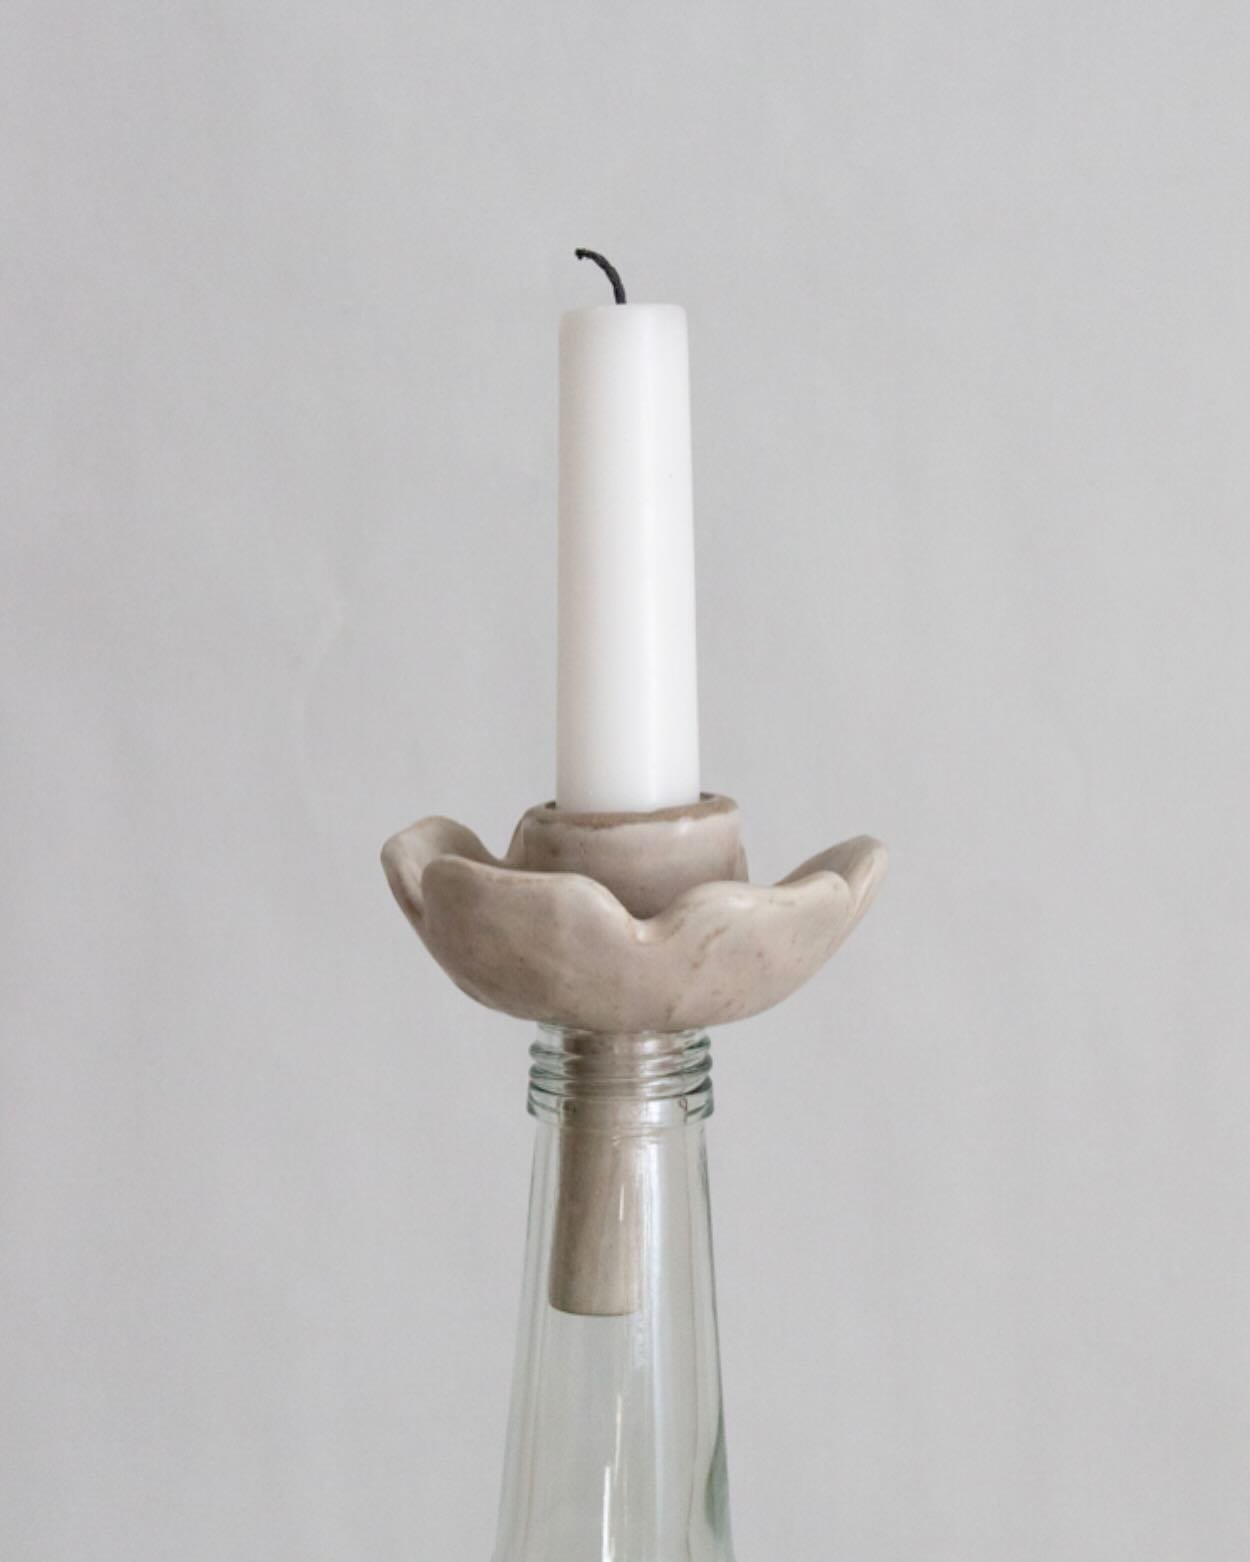 New tiny candleholders shaped as flowers for all your old wine bottles 🍾